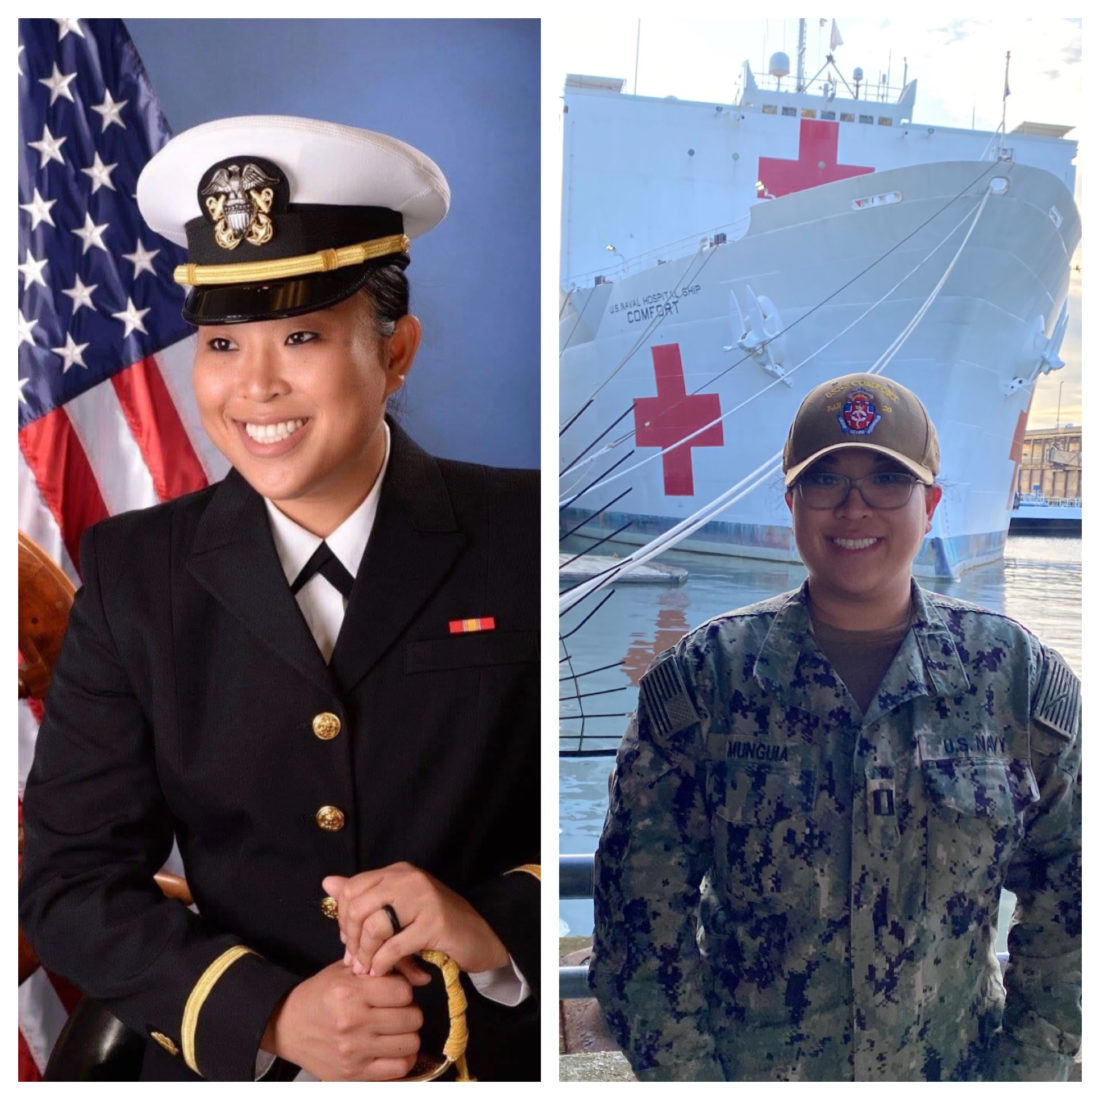 On left, woman wearing U.S. Navy uniform with American flag in the background. On right, same woman wearing U.S. Navy uniform with medical ship in the background. 